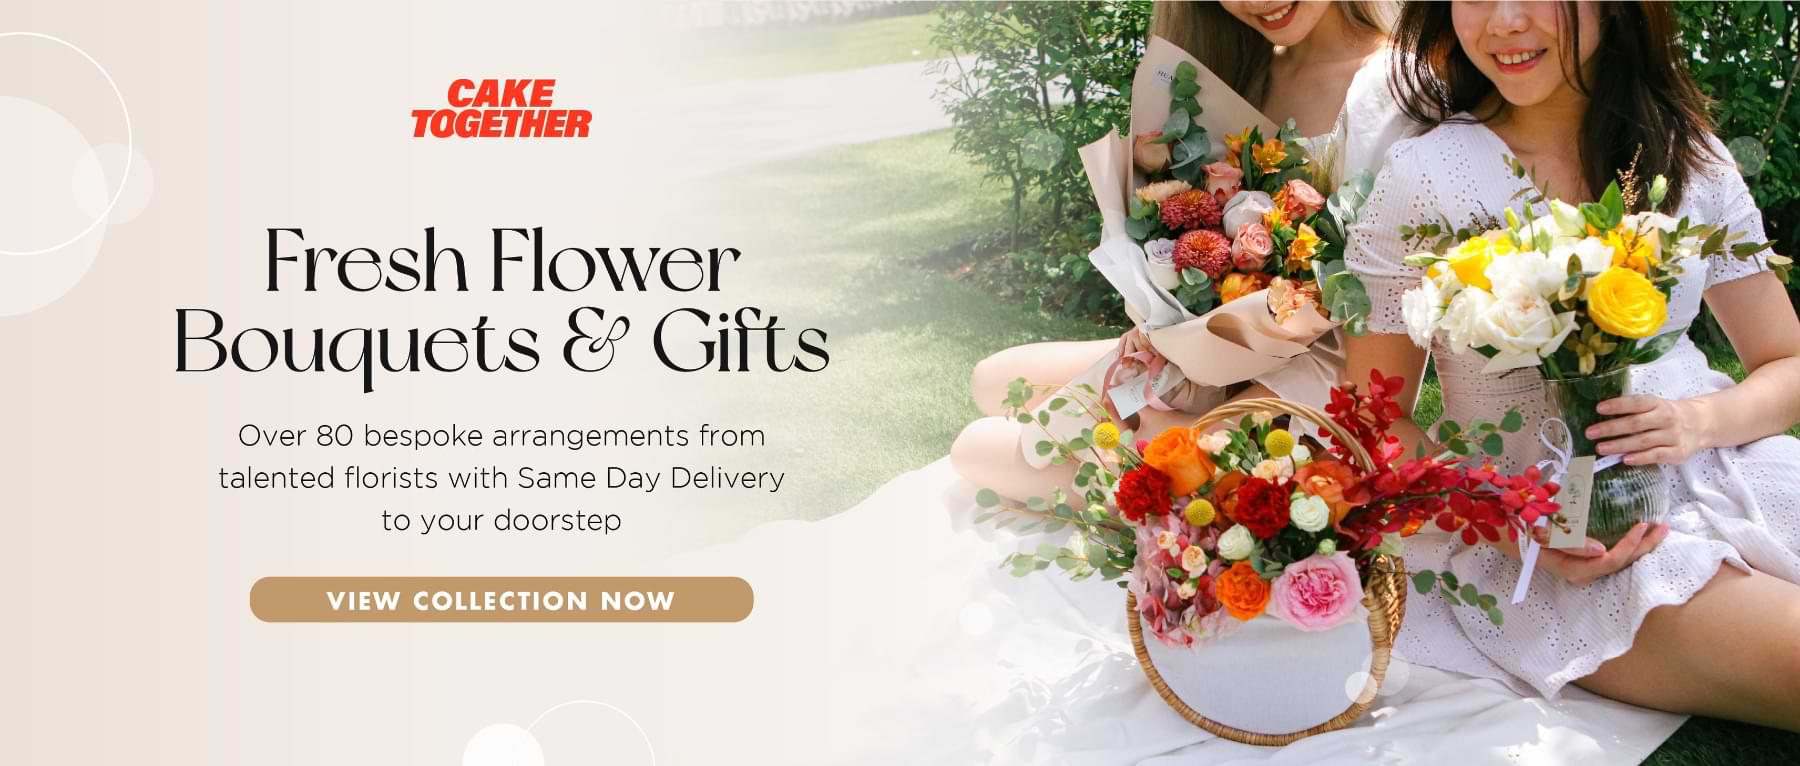 Cake Together - Fresh Flower Bouquets & Gifts